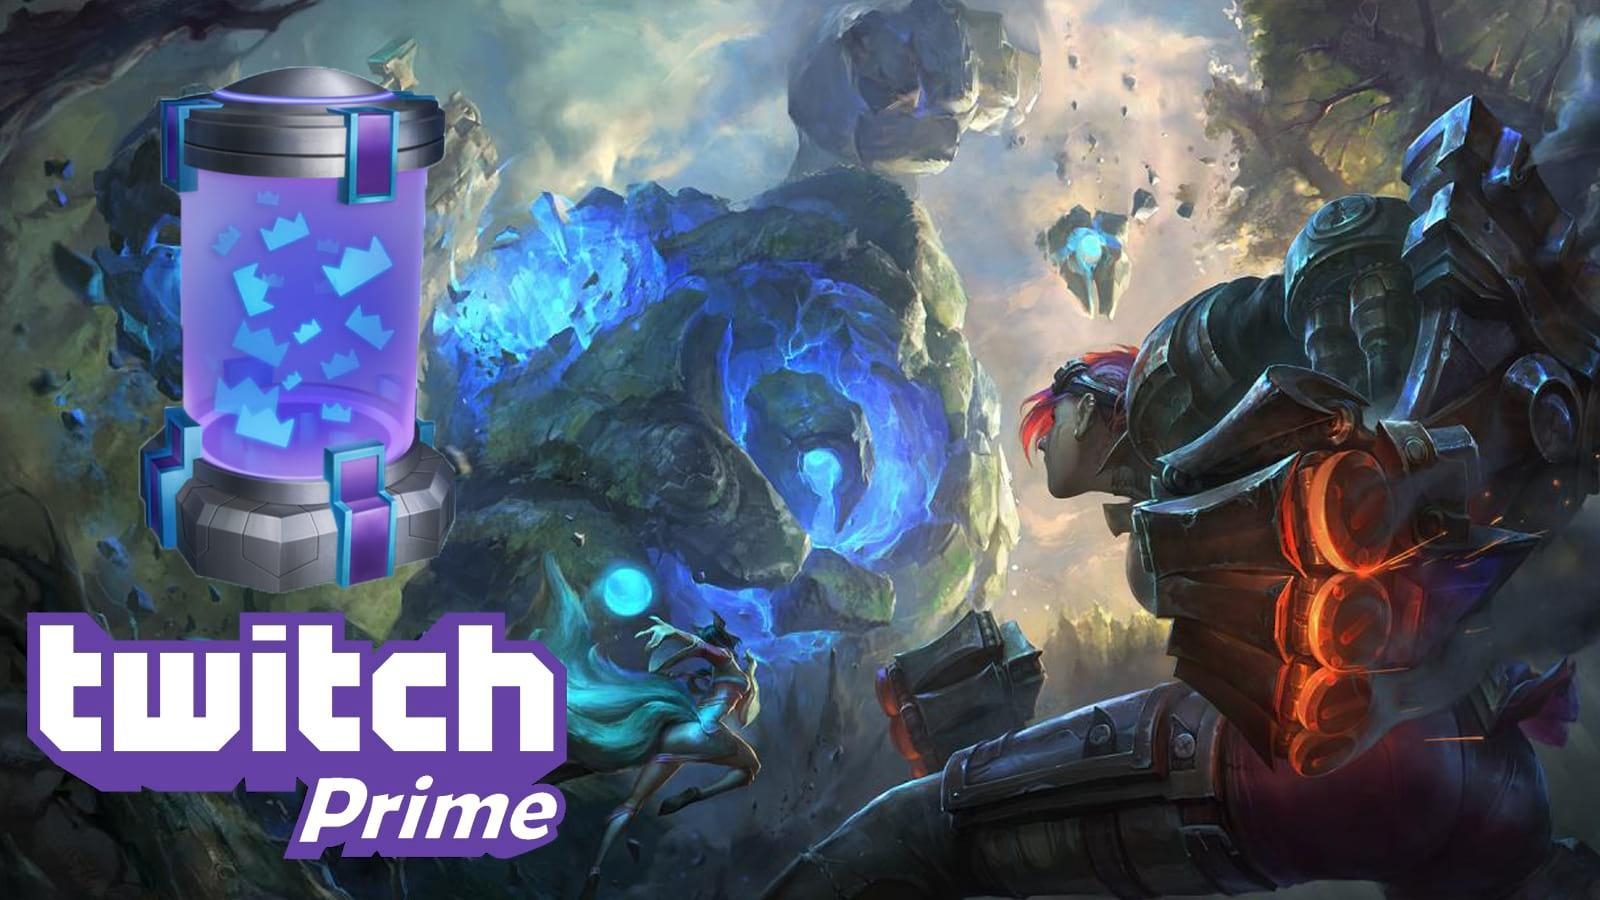 How to get four months of League of Legends Twitch Prime loot